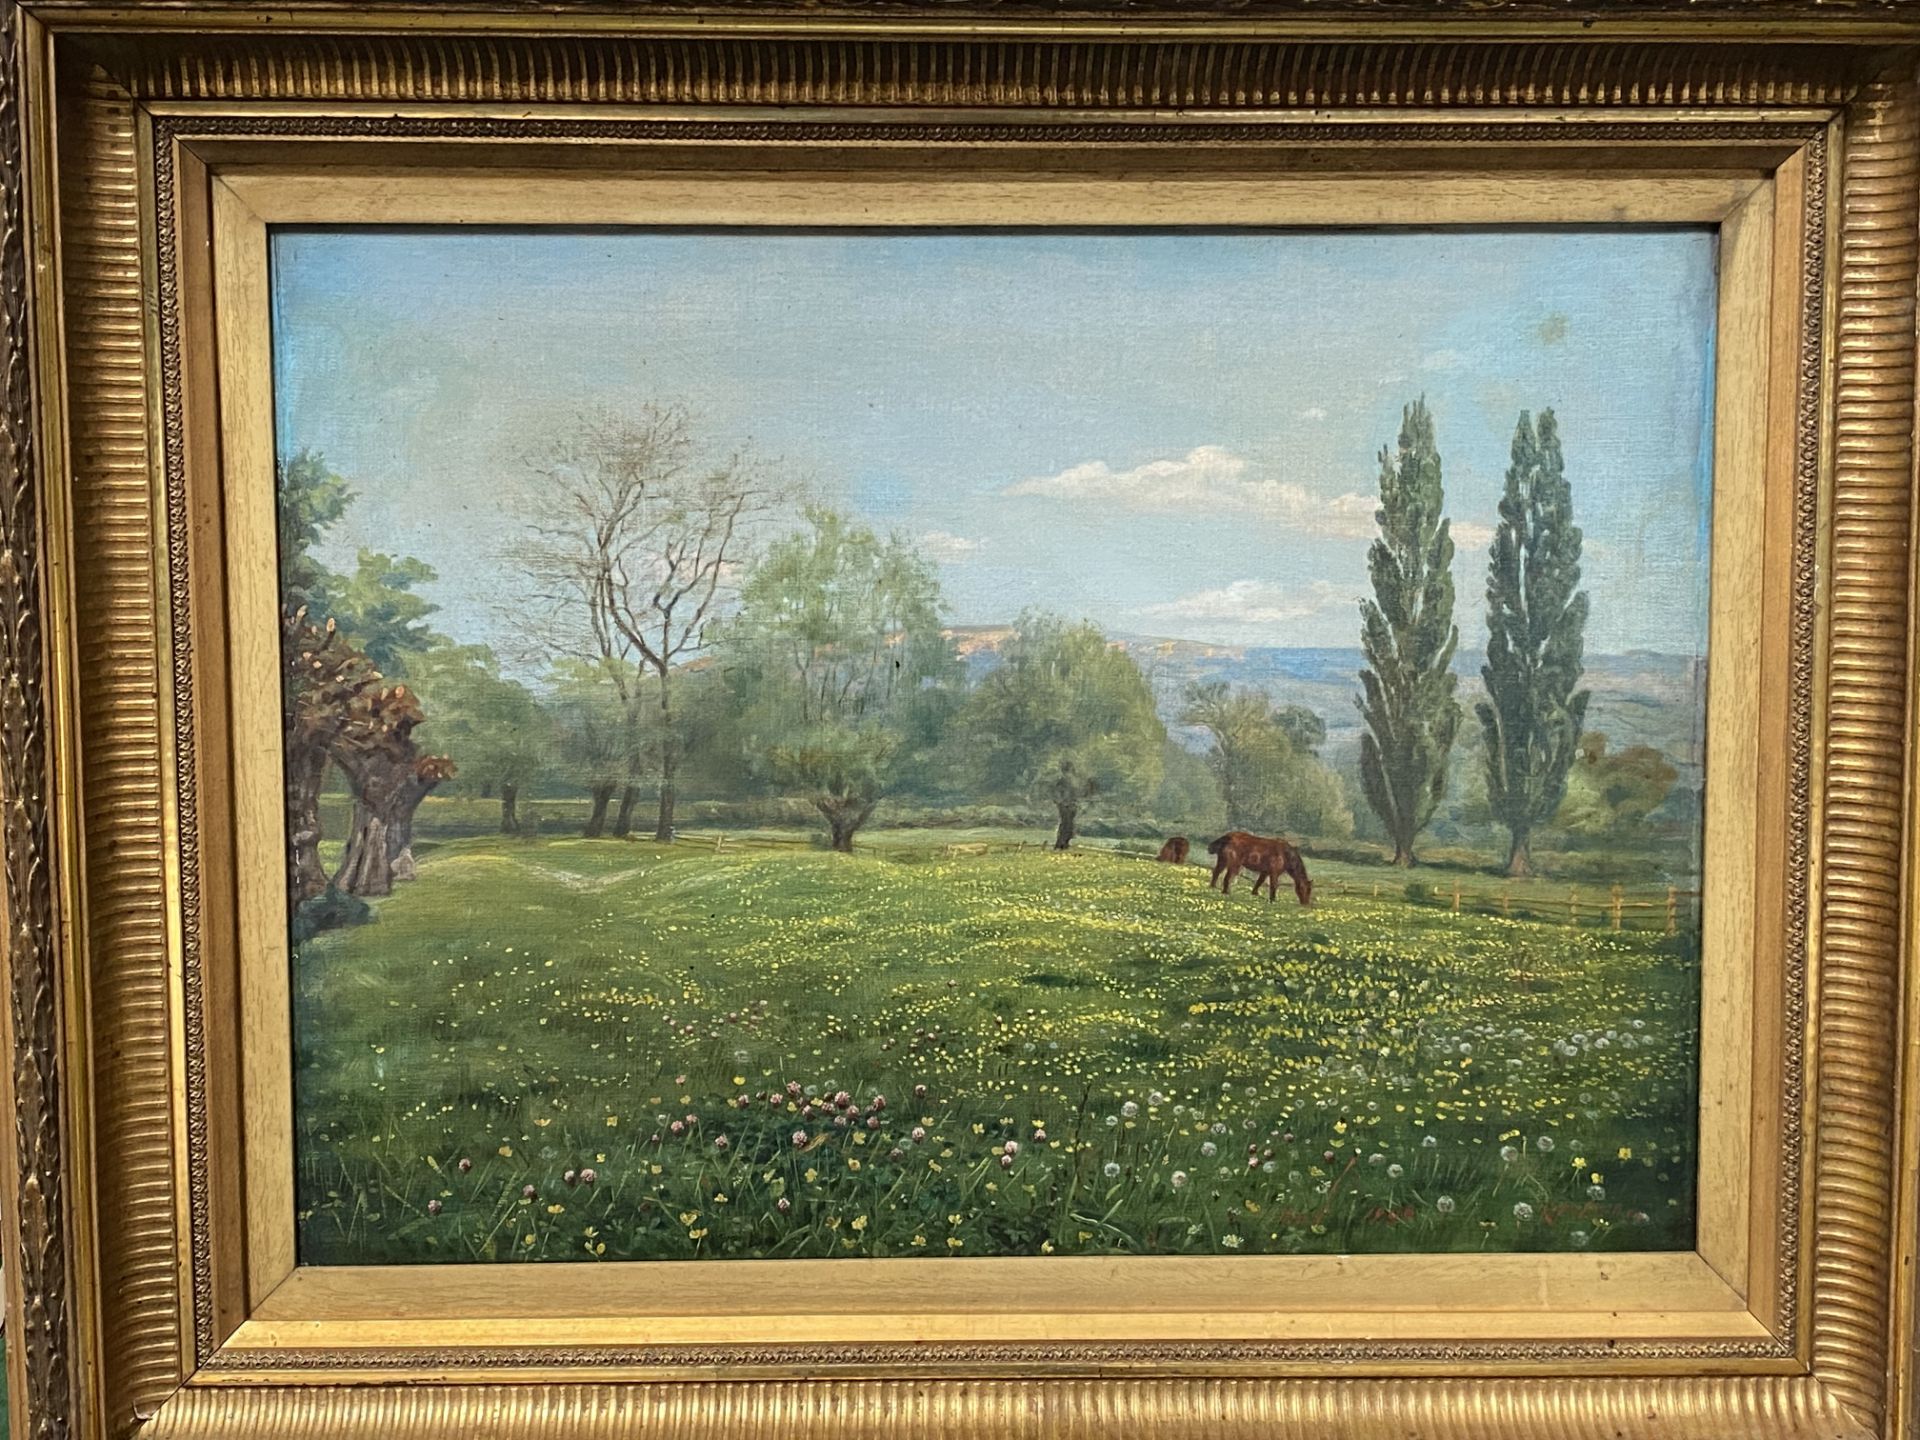 Framed oil on canvas of grazing horses dated 1996 - Image 4 of 4